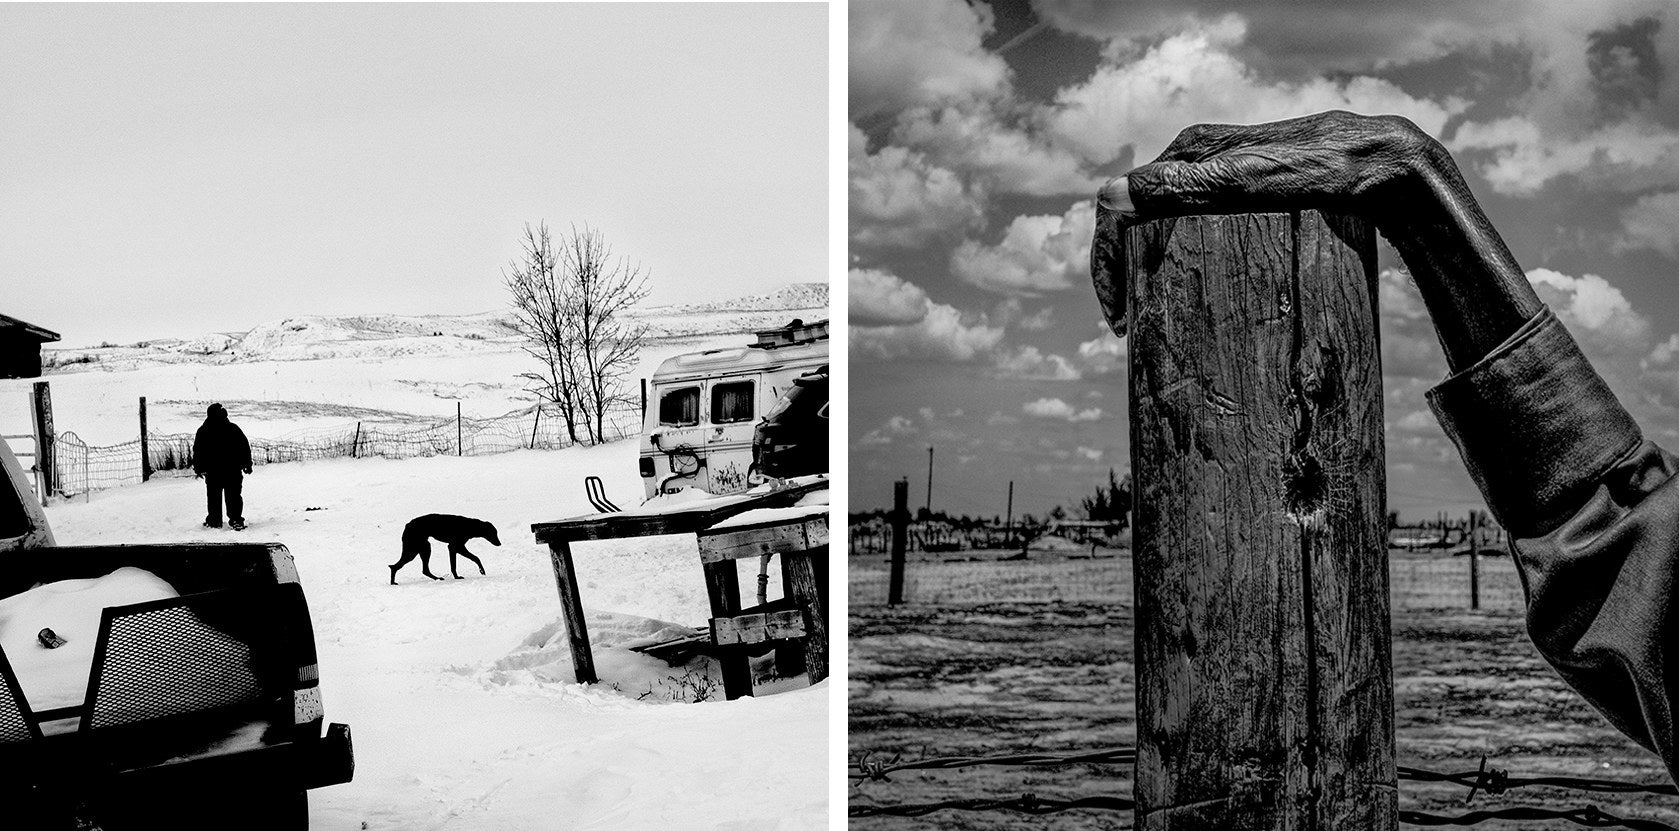 Two side-by-side images show a person standing in a snowy yard near a dog and camper van, and a wrinkled hand holding onto the top of a wooden post